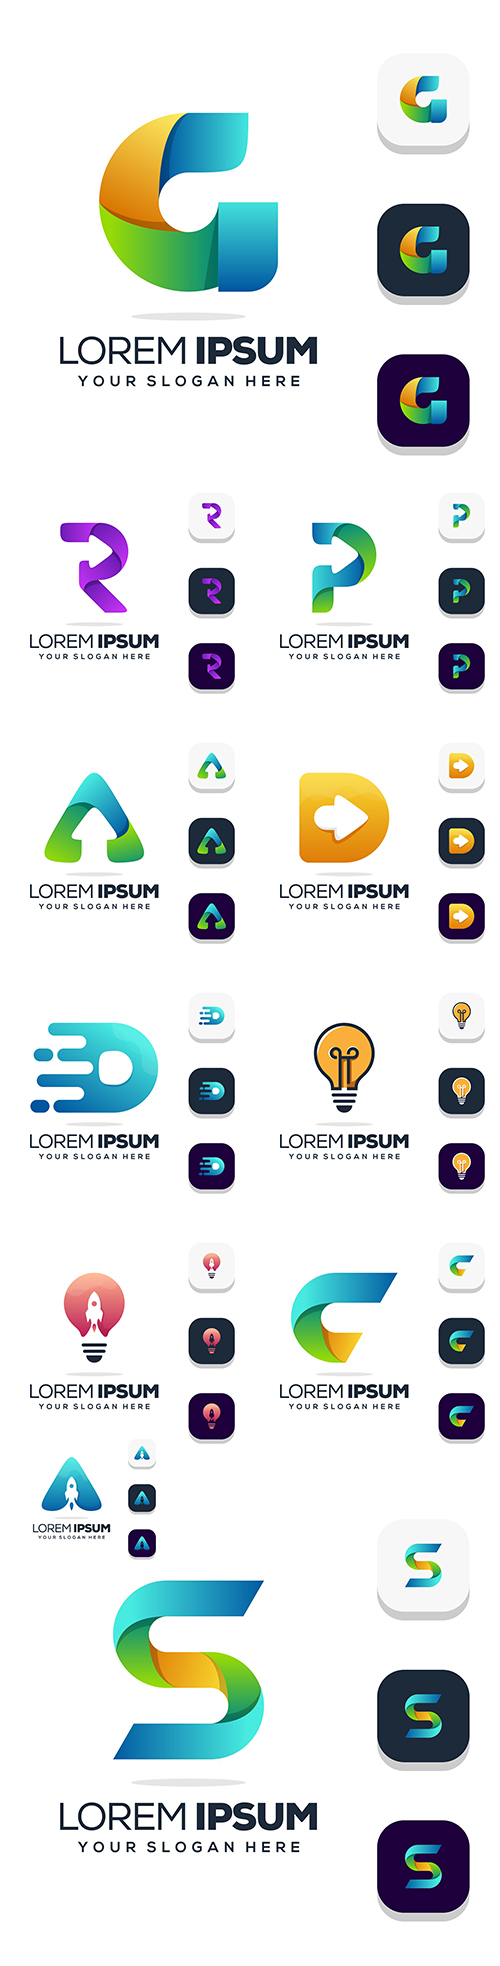 Capital letter business logo design and icons
